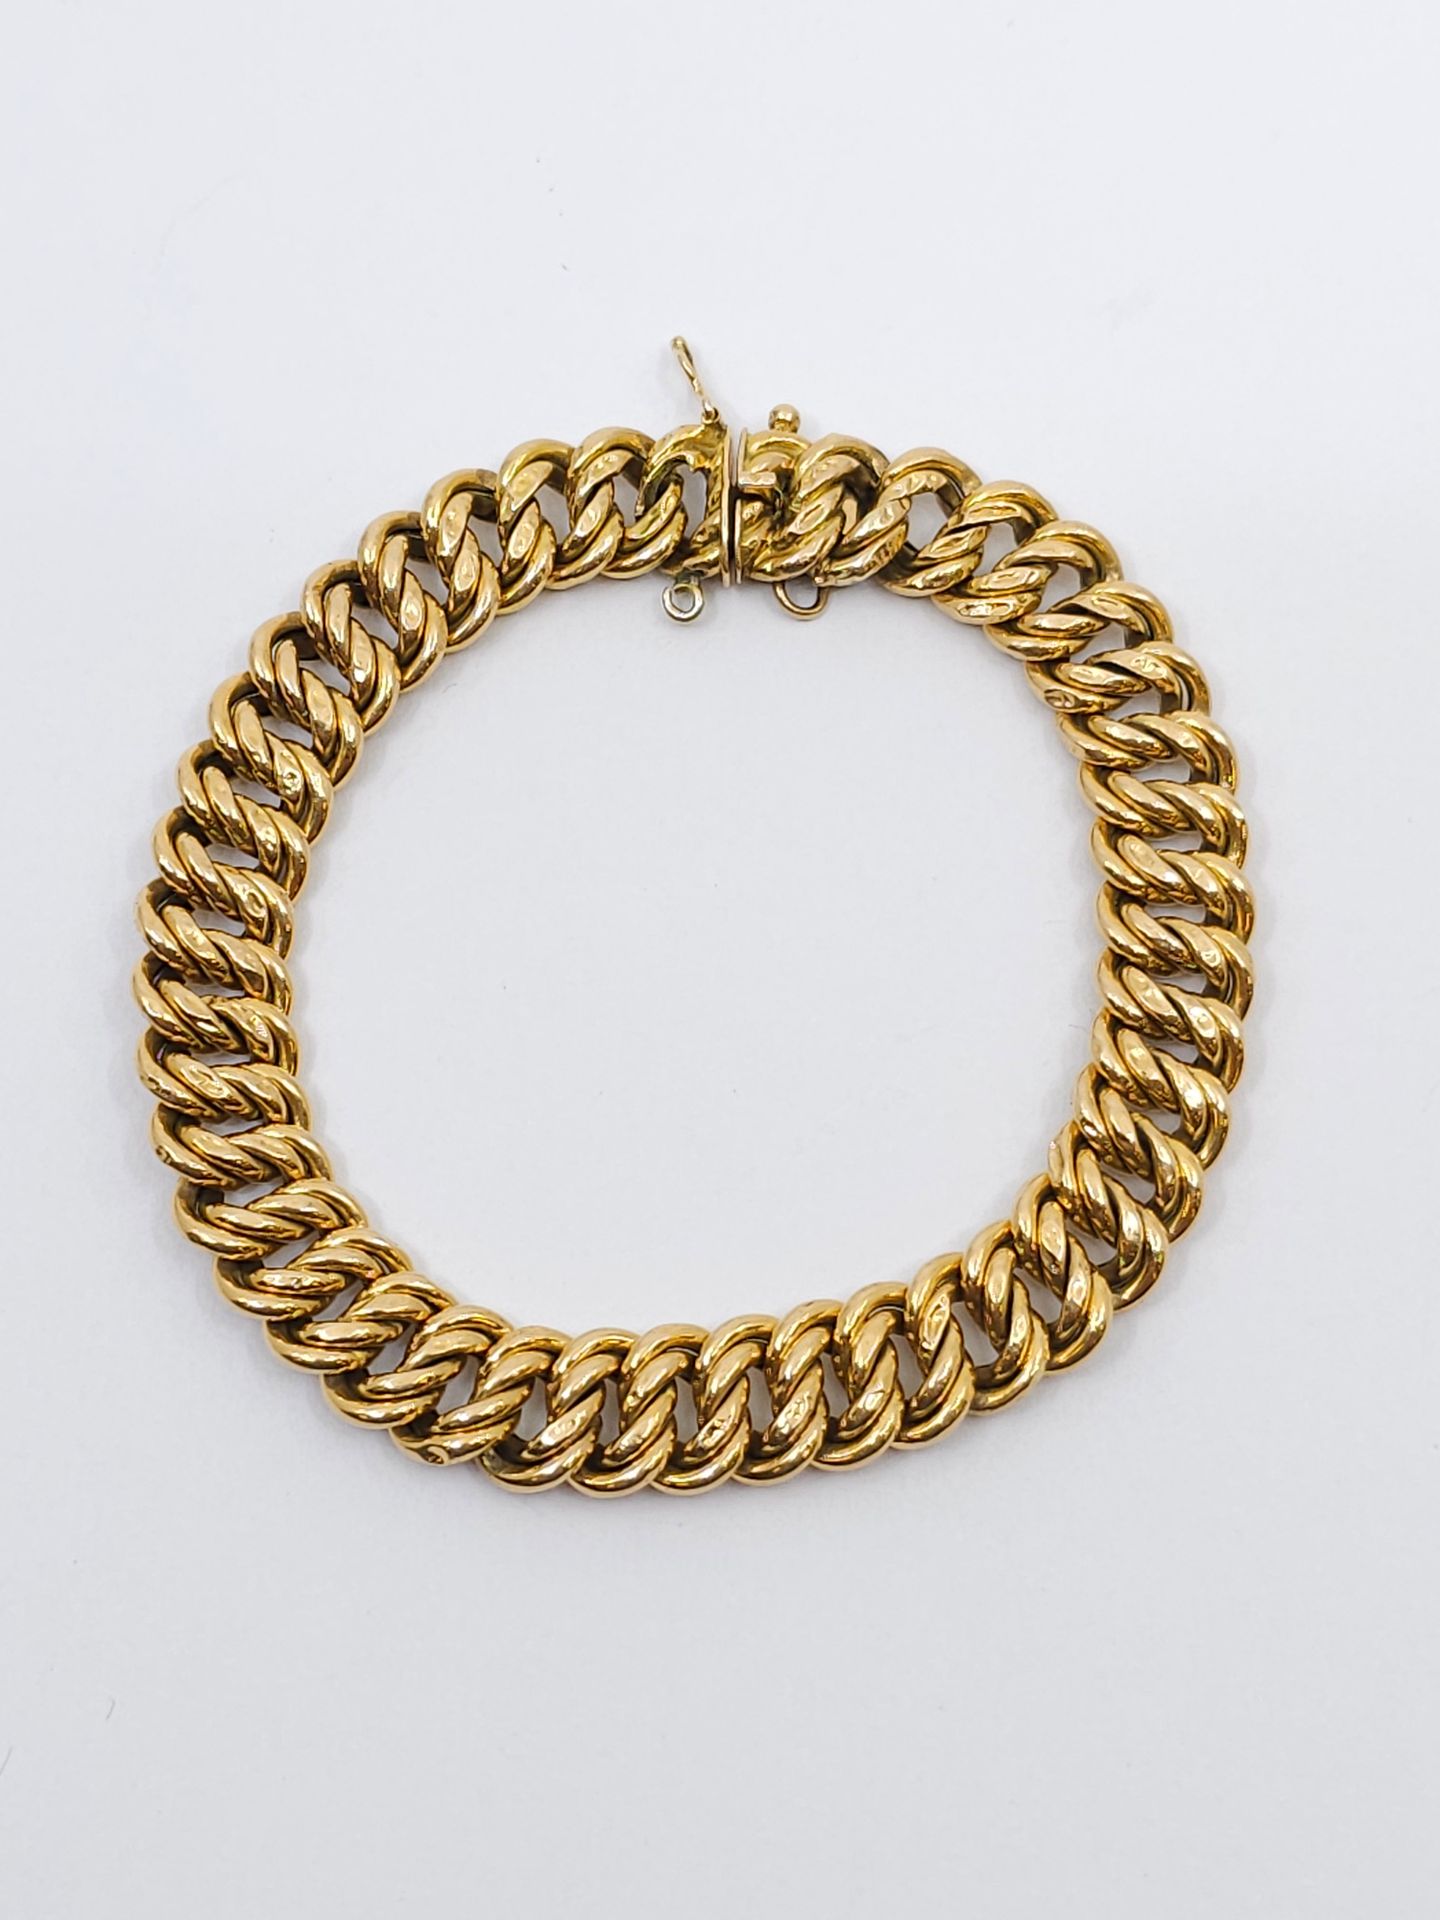 Null BRACELET American mesh in yellow gold 750
weight : 12,37 g